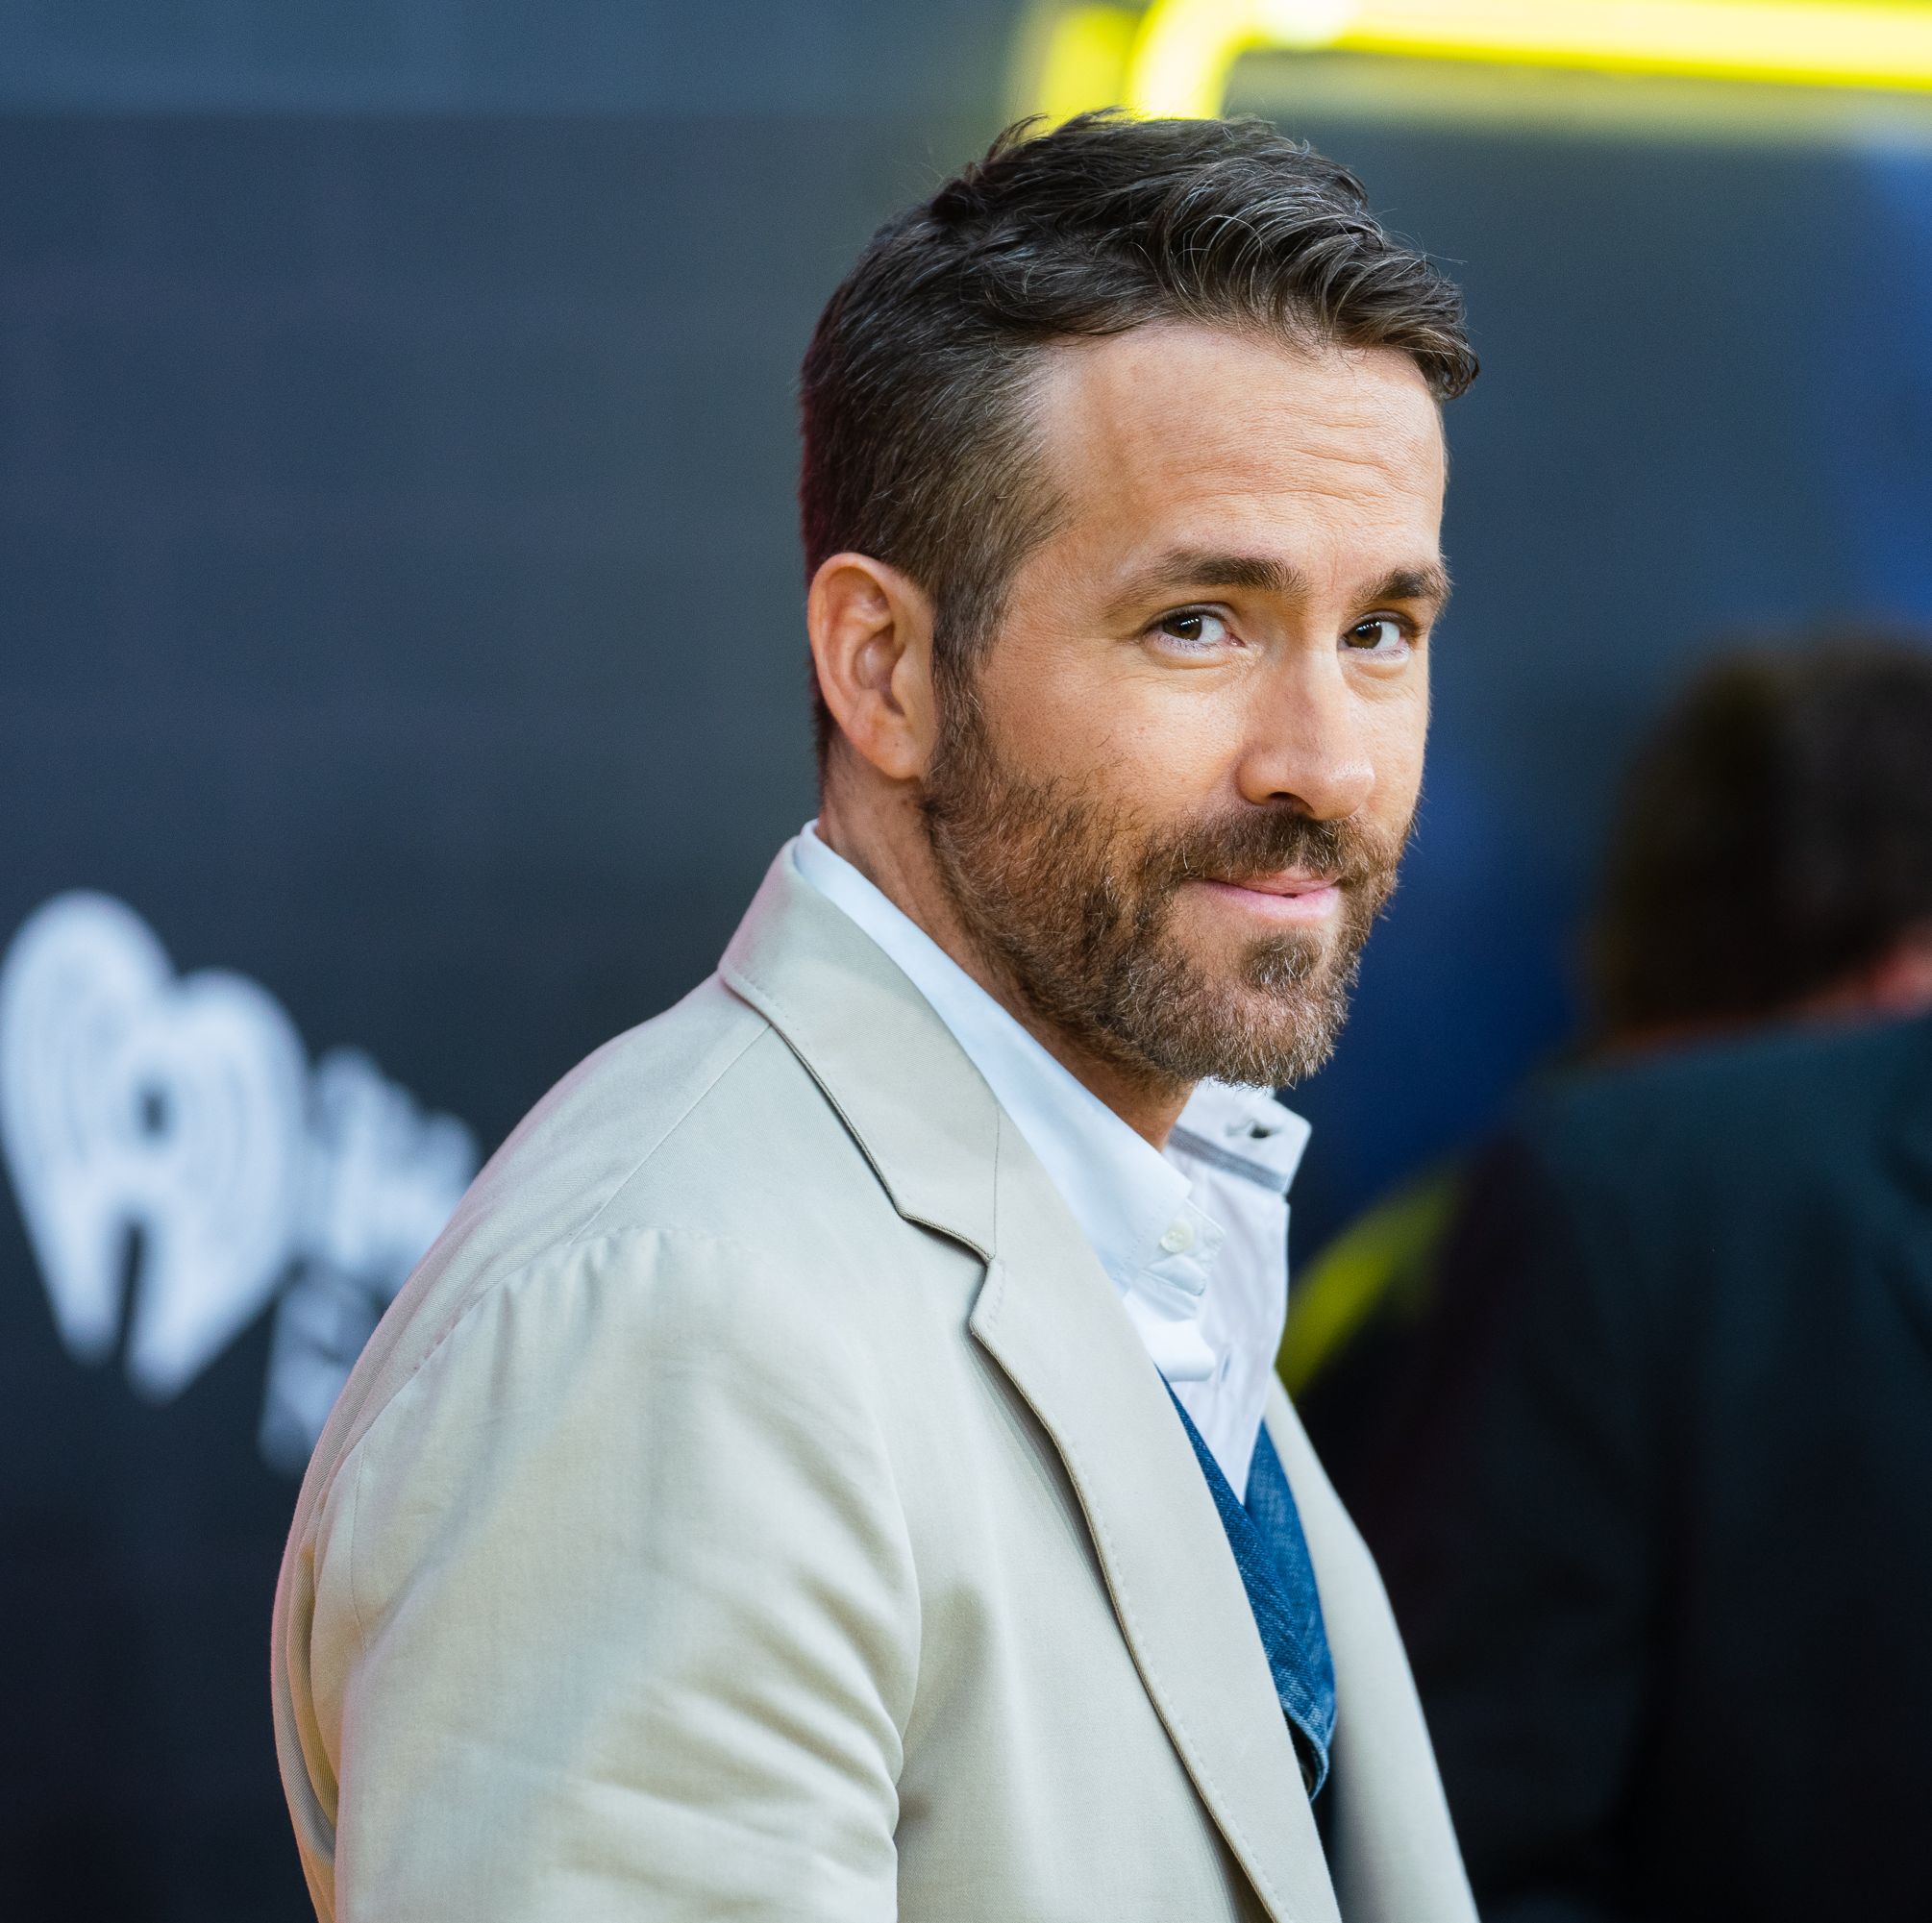 How Ryan Reynolds relates to weird Free Guy character